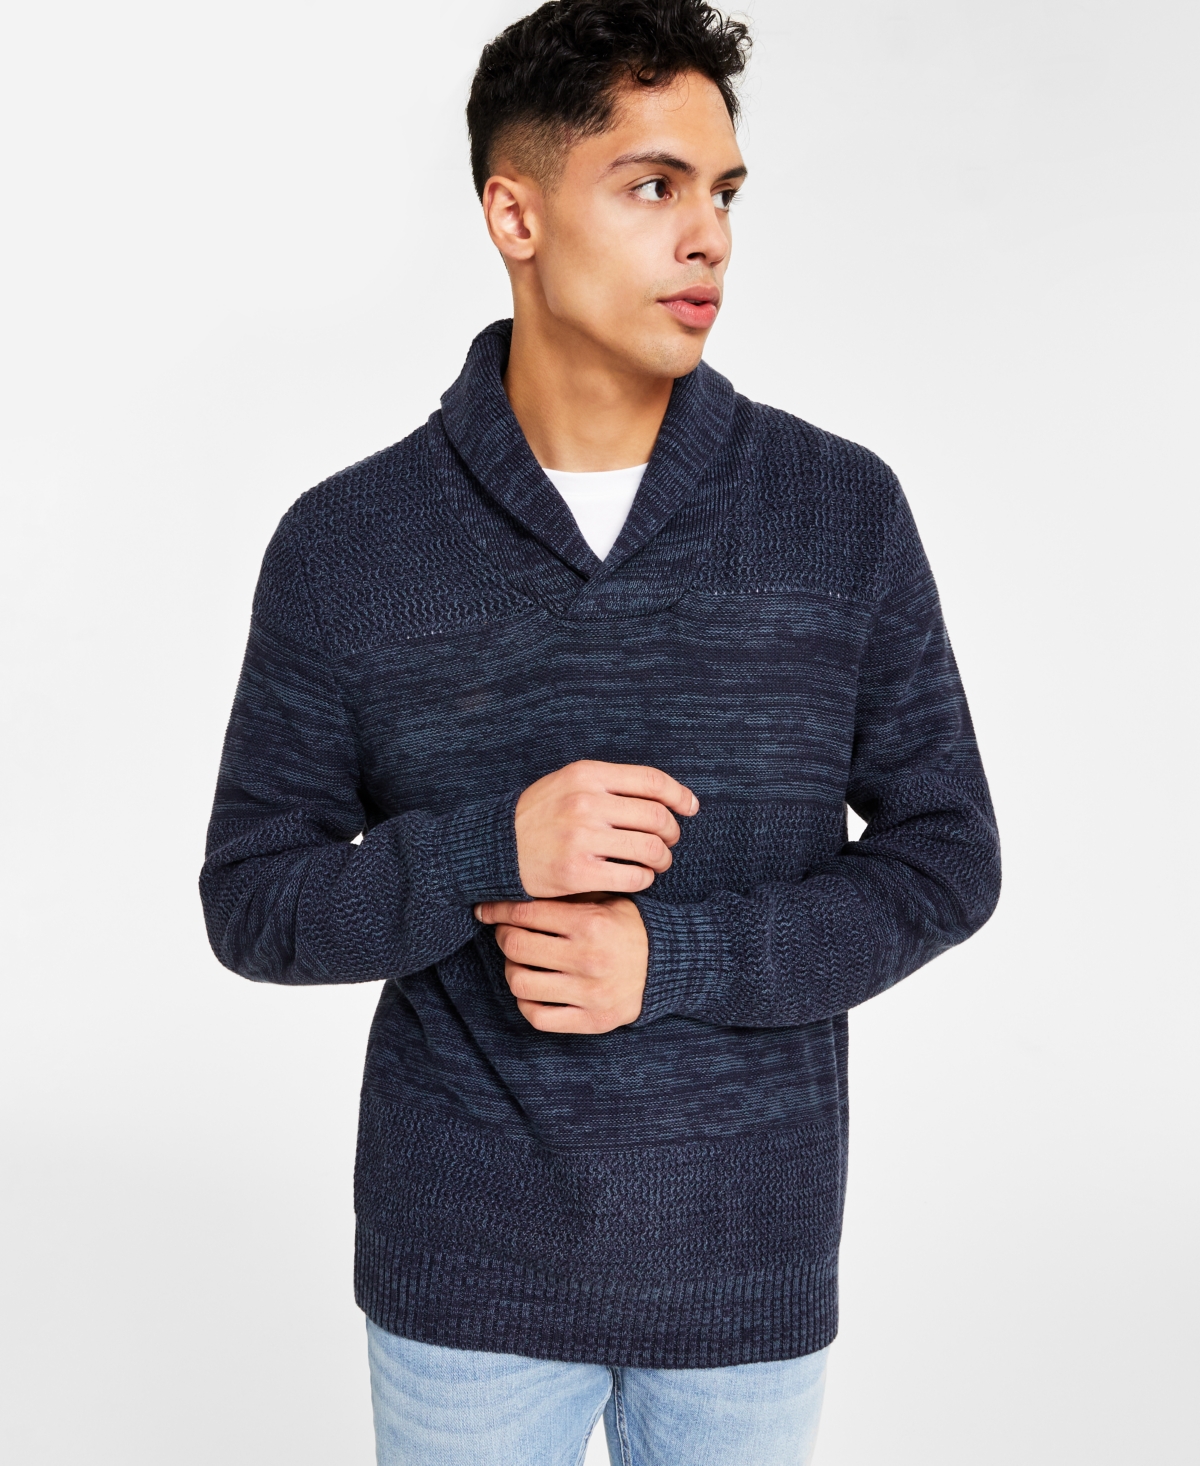 Men's Shawl-Collar Sweater, Created for Macy's - Navy Suit